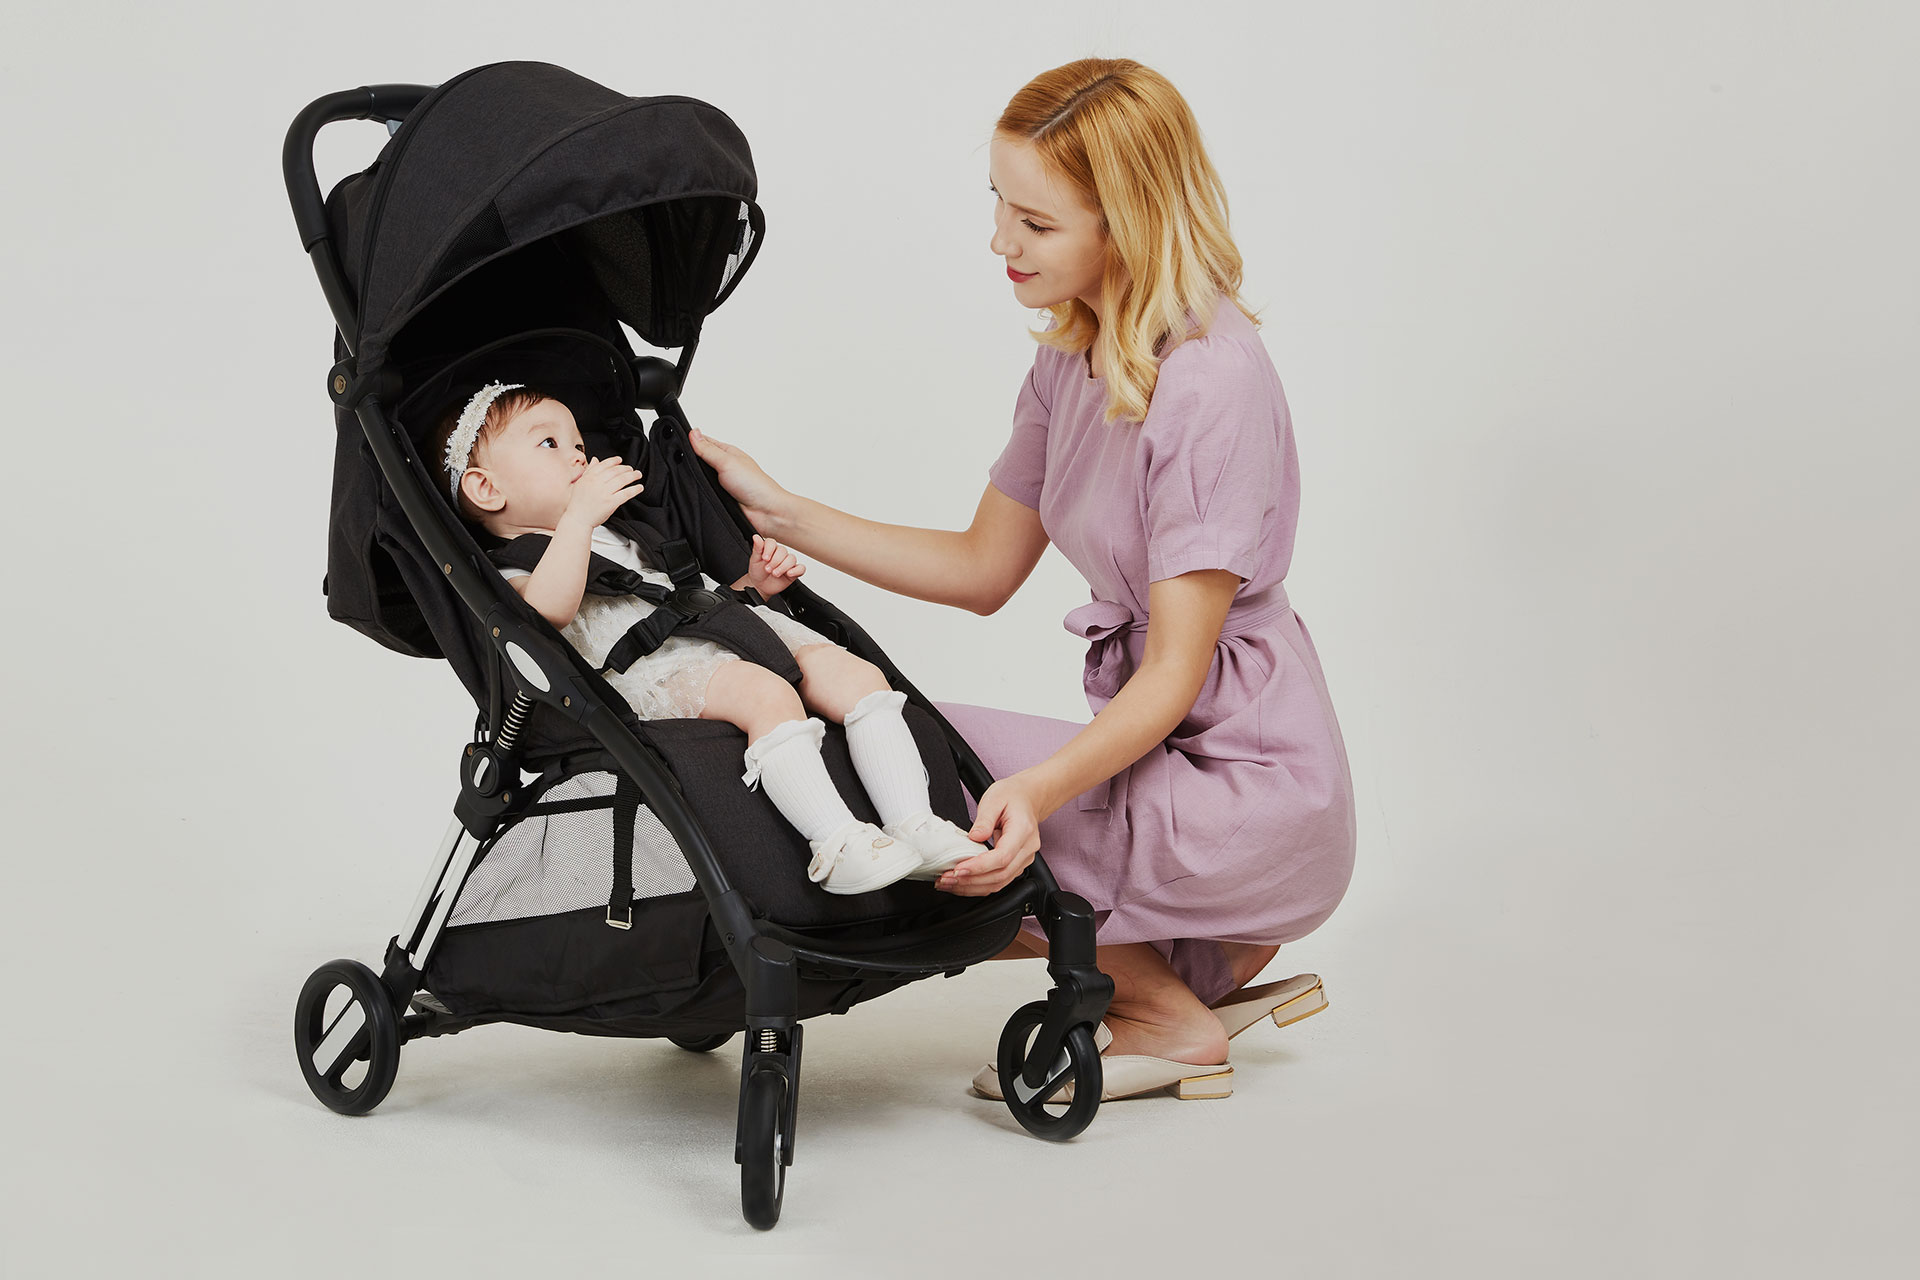 meer Grap Gespecificeerd TitaniumBaby | High-quality baby products - since 1953